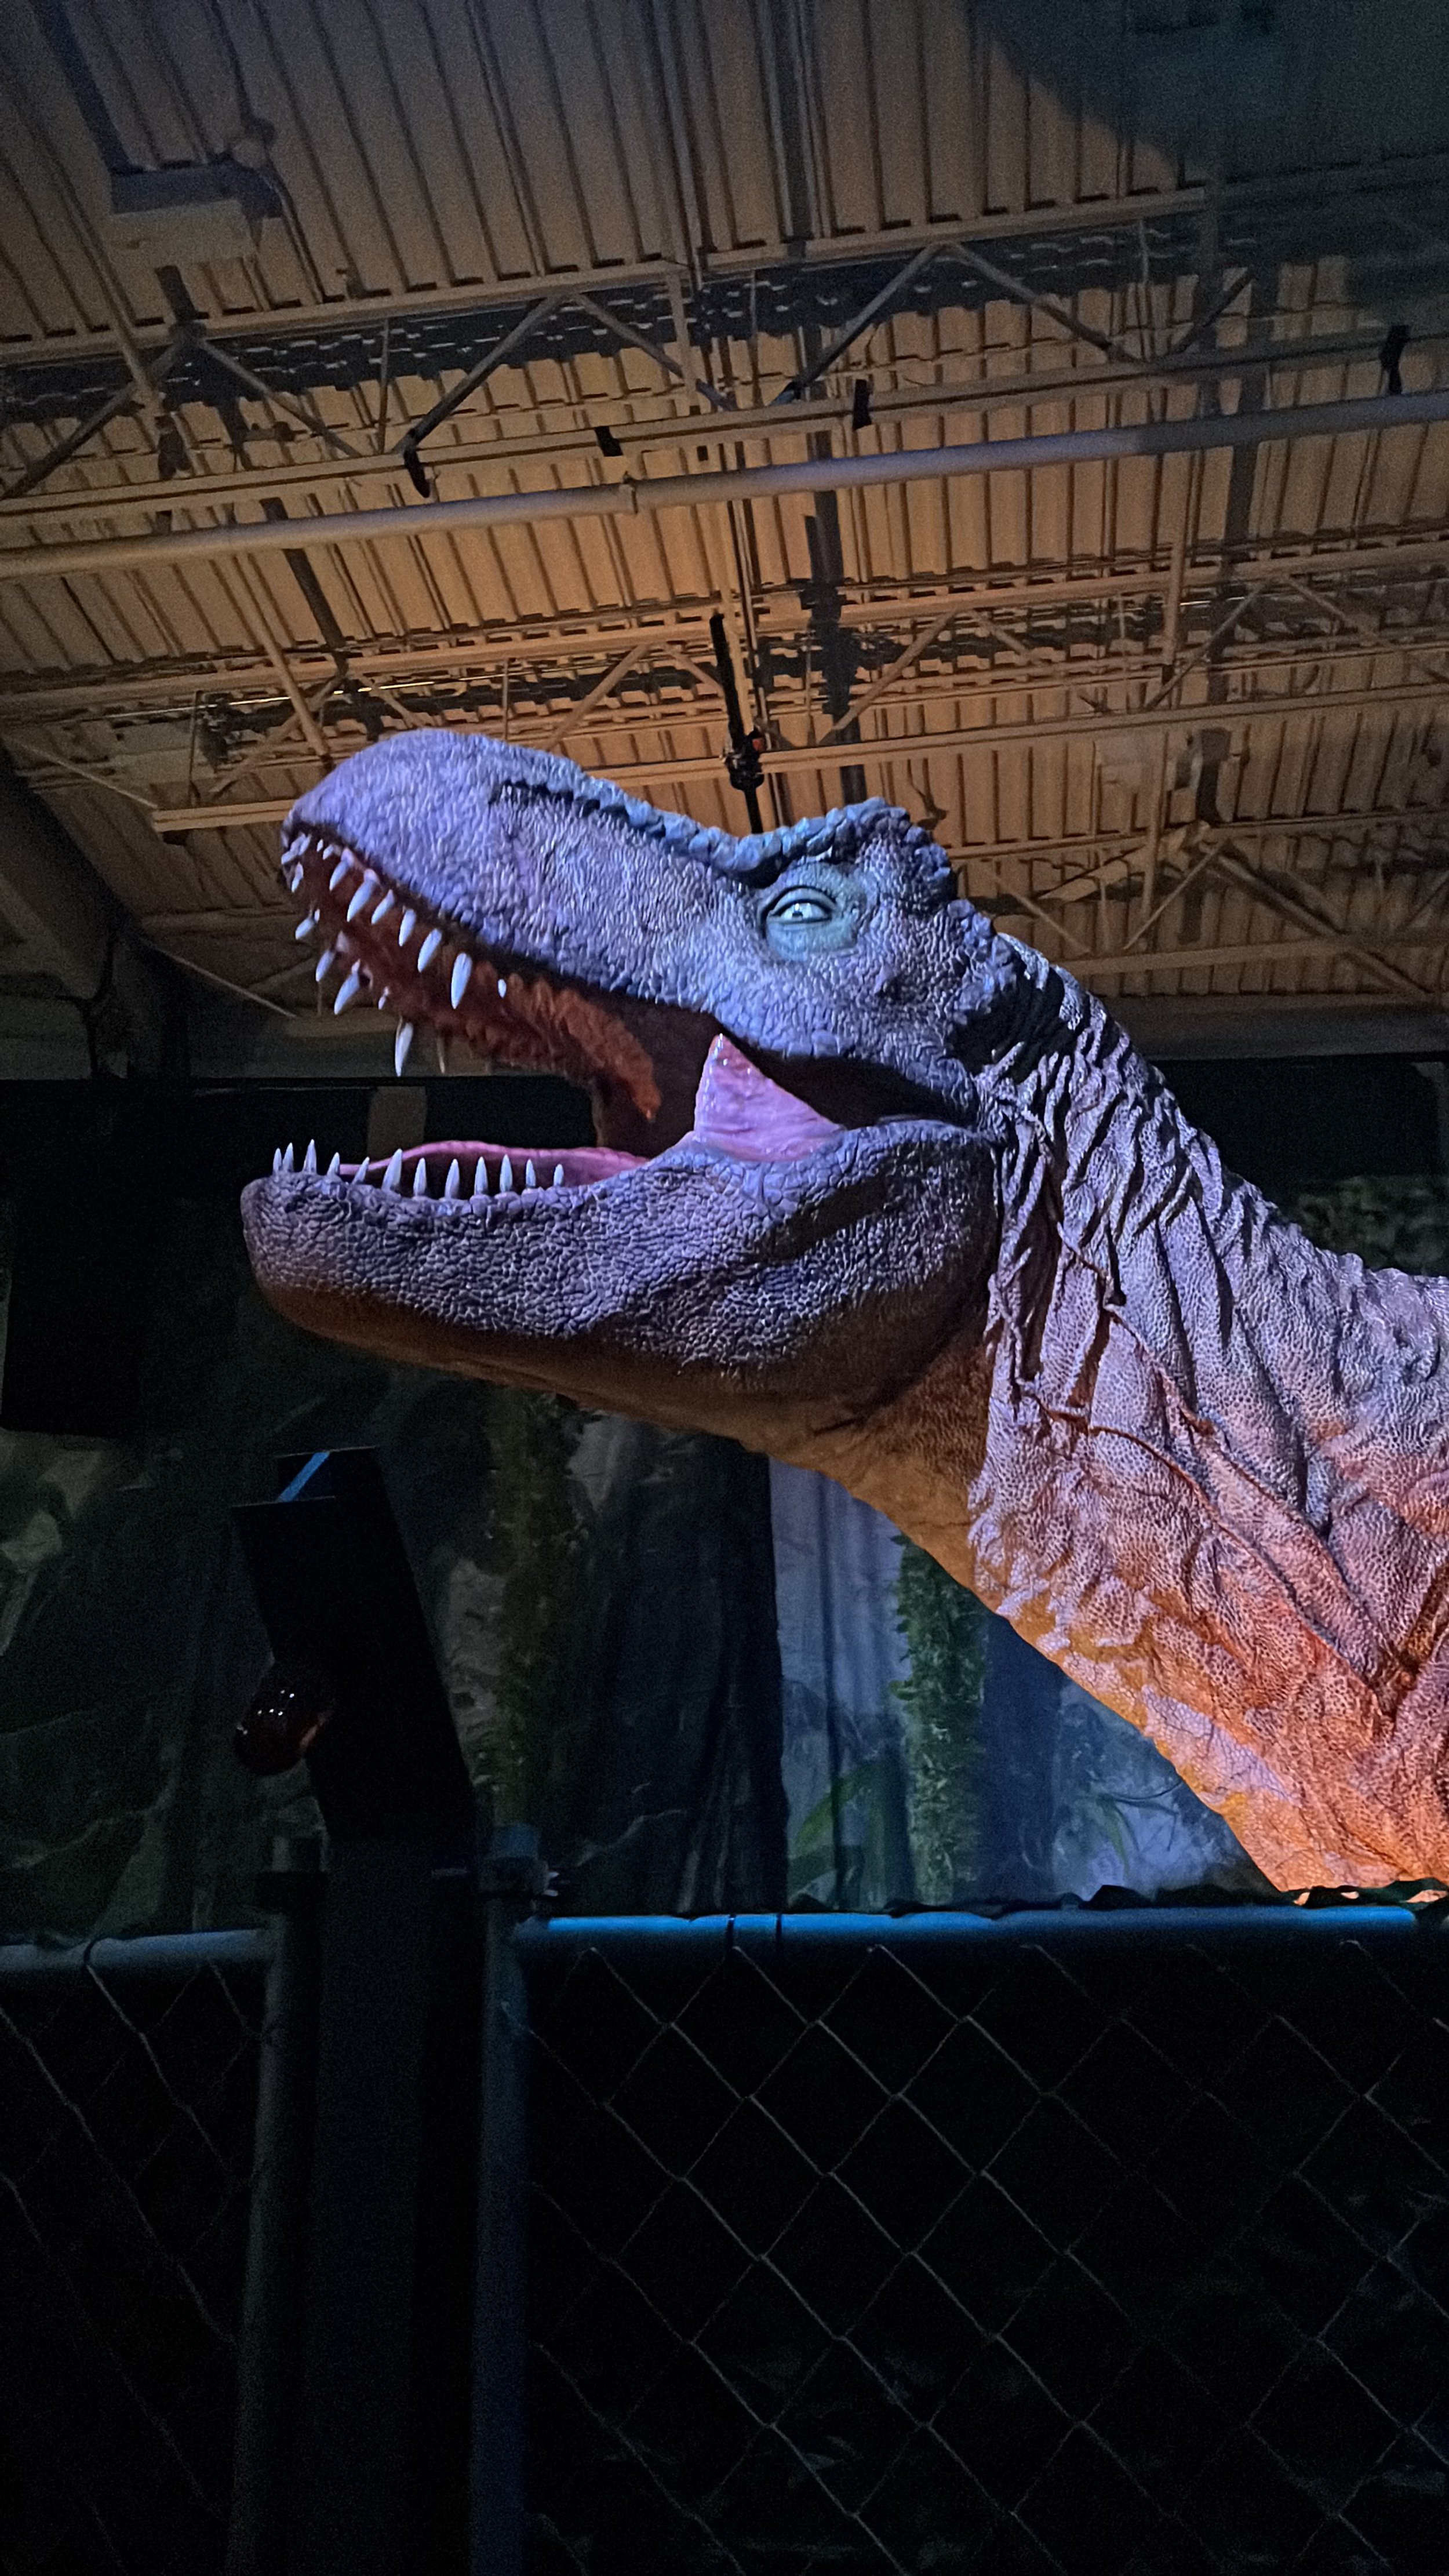 The Jurassic World Exhibition roars into Mississauga